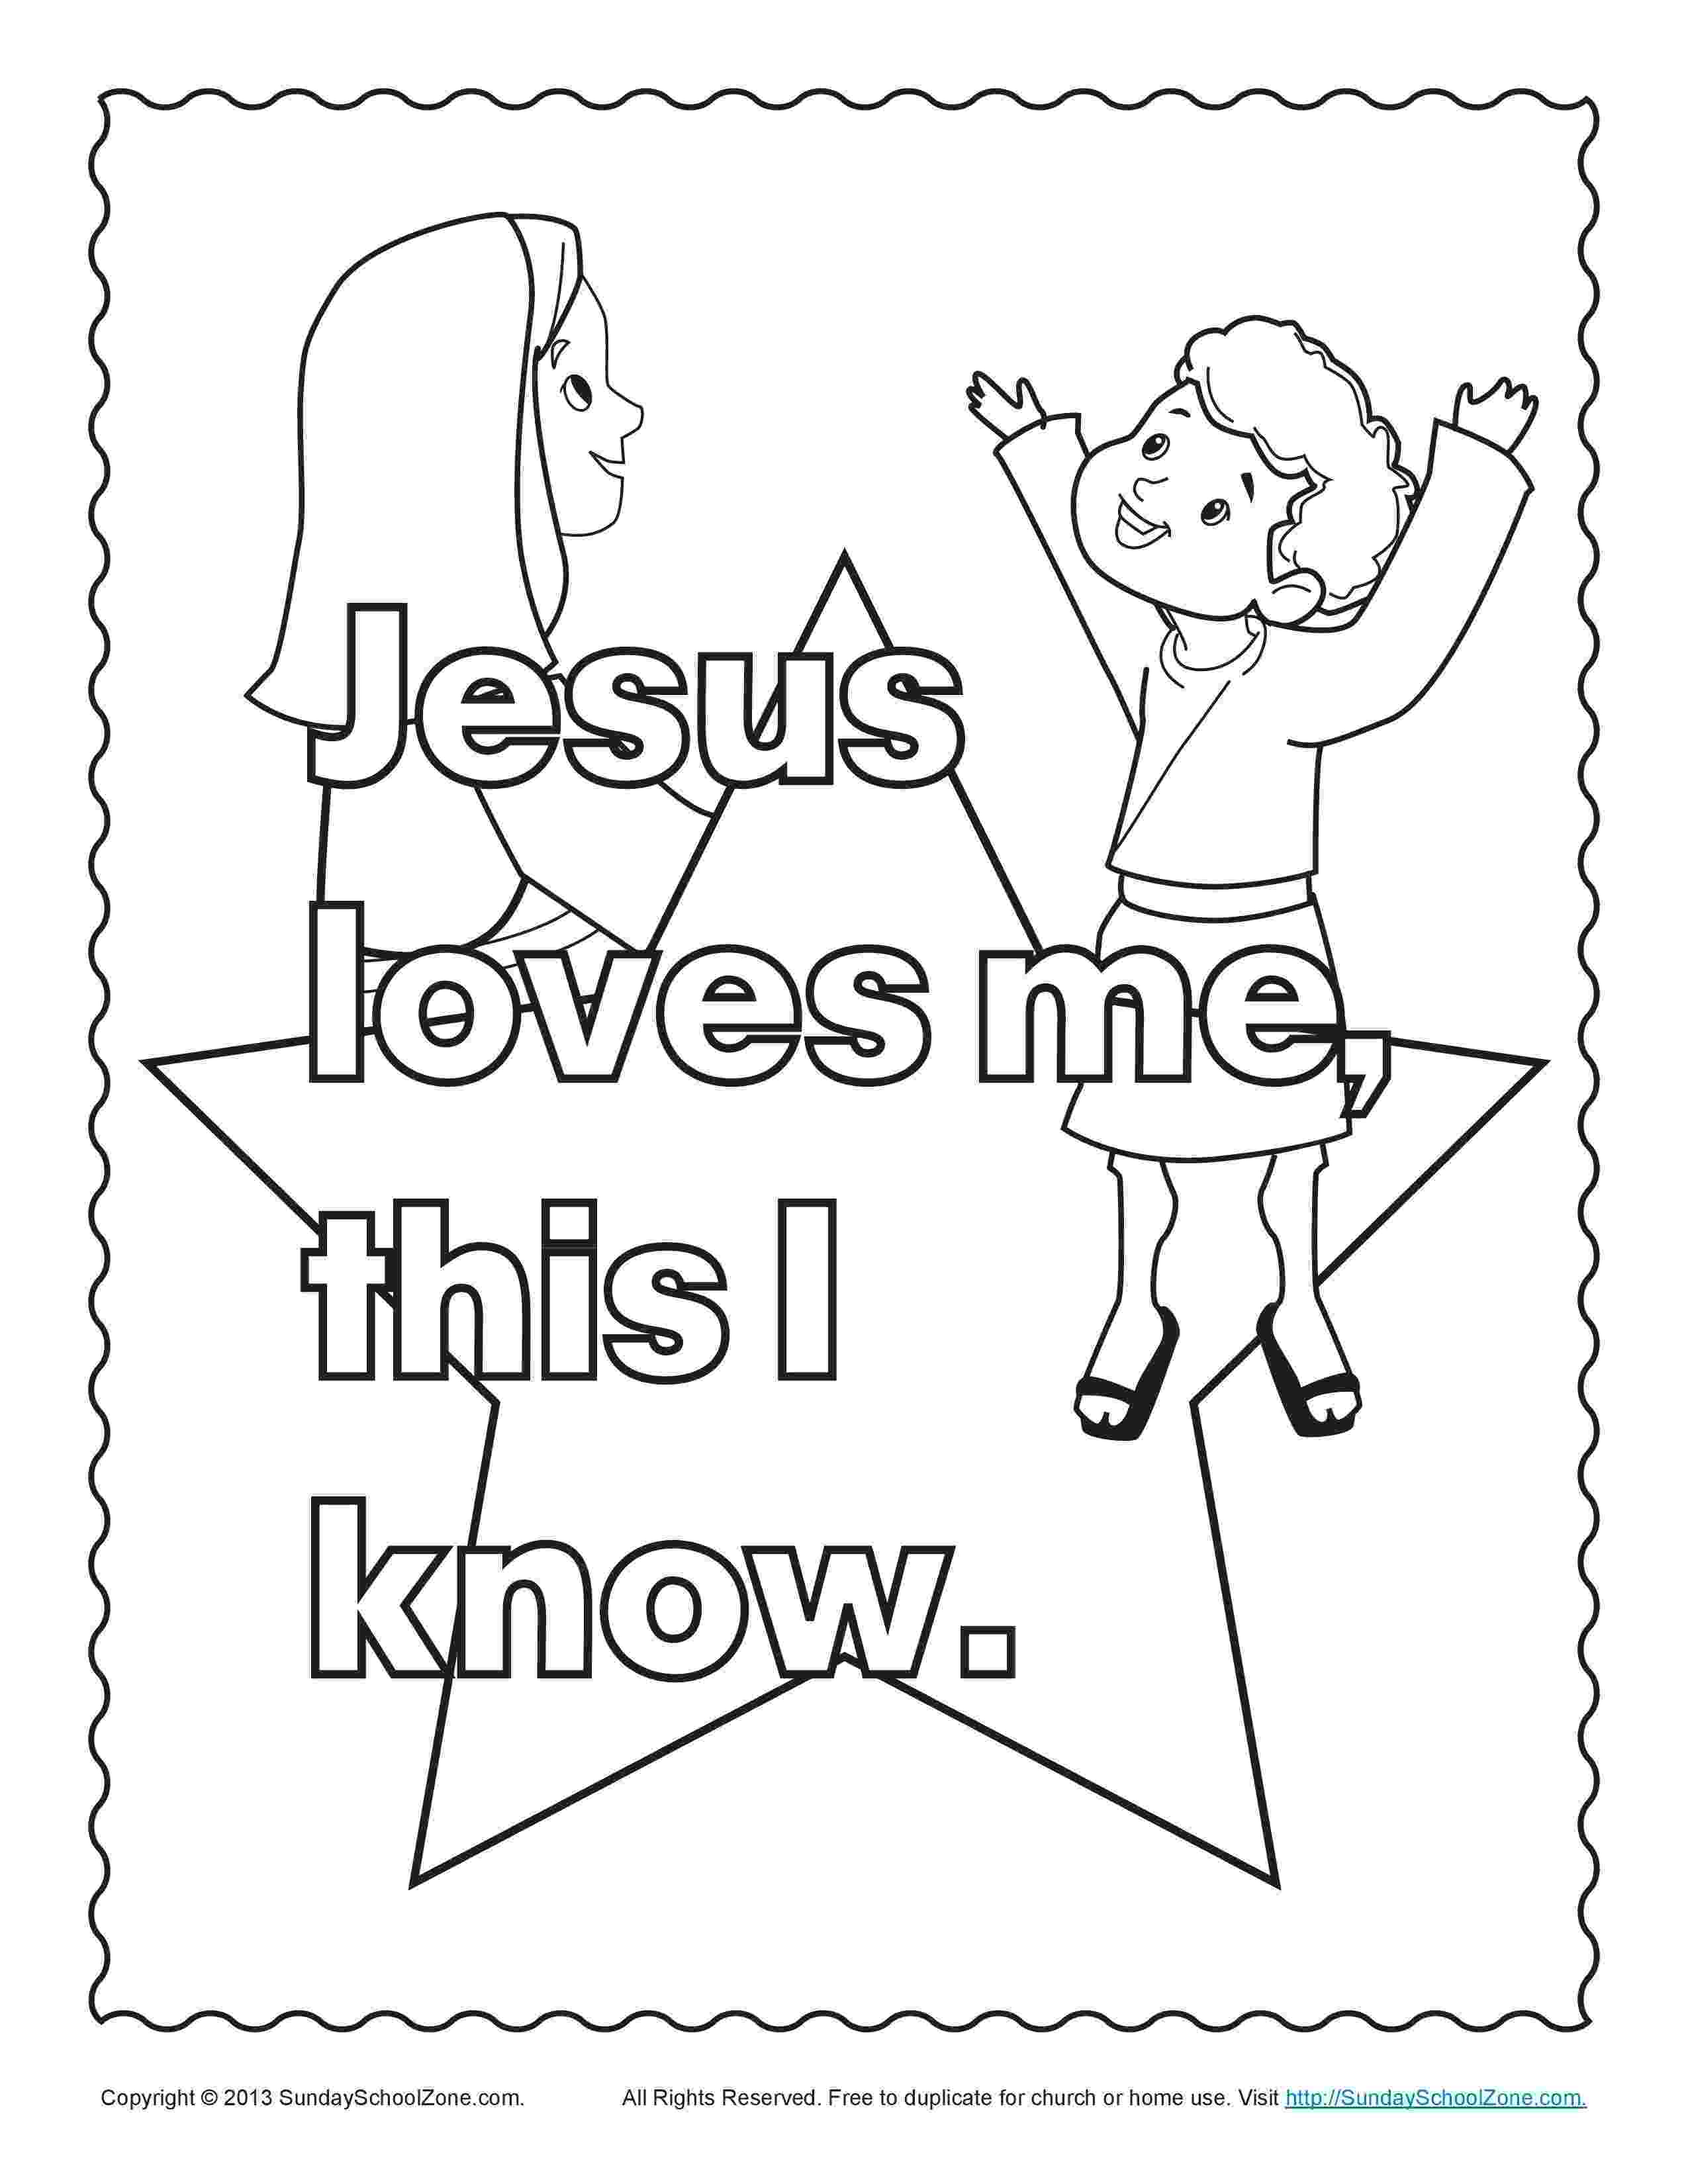 i am a child of god coloring page 1000 images about coloring pages on pinterest coloring coloring god a i of am child page 